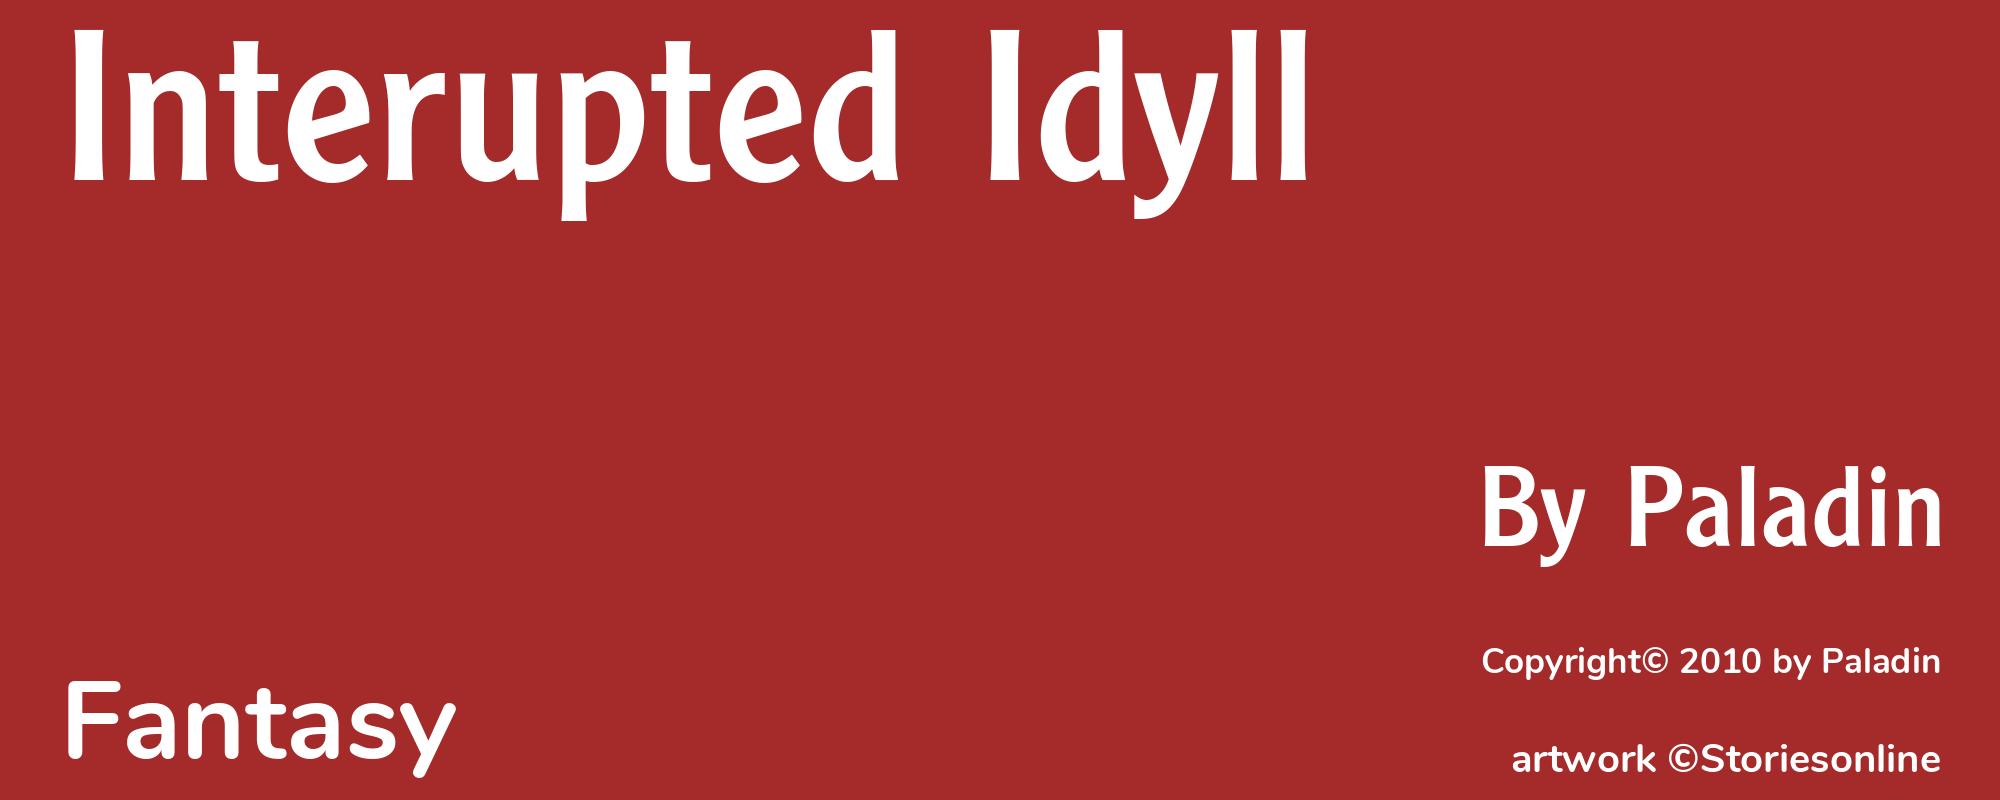 Interupted Idyll - Cover